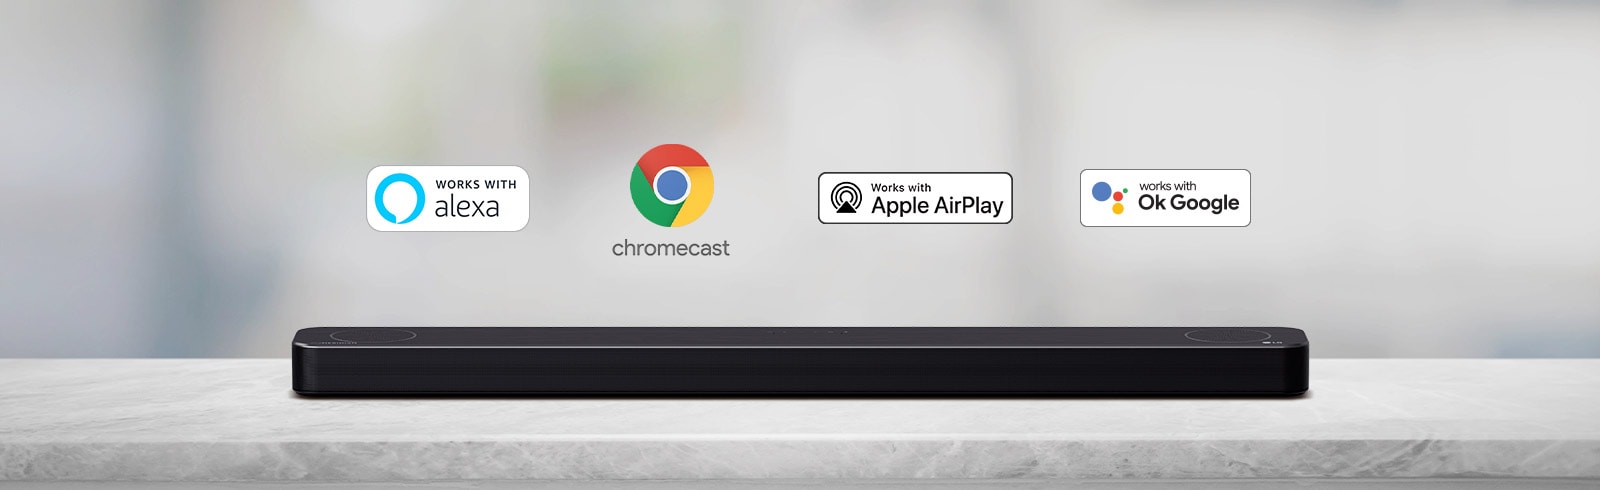 There is a soundbar placed on a gray shelf and there are AI platform logos, in order of Alexa, Chromecast, Apple Airplay, and OK Google from left to right.